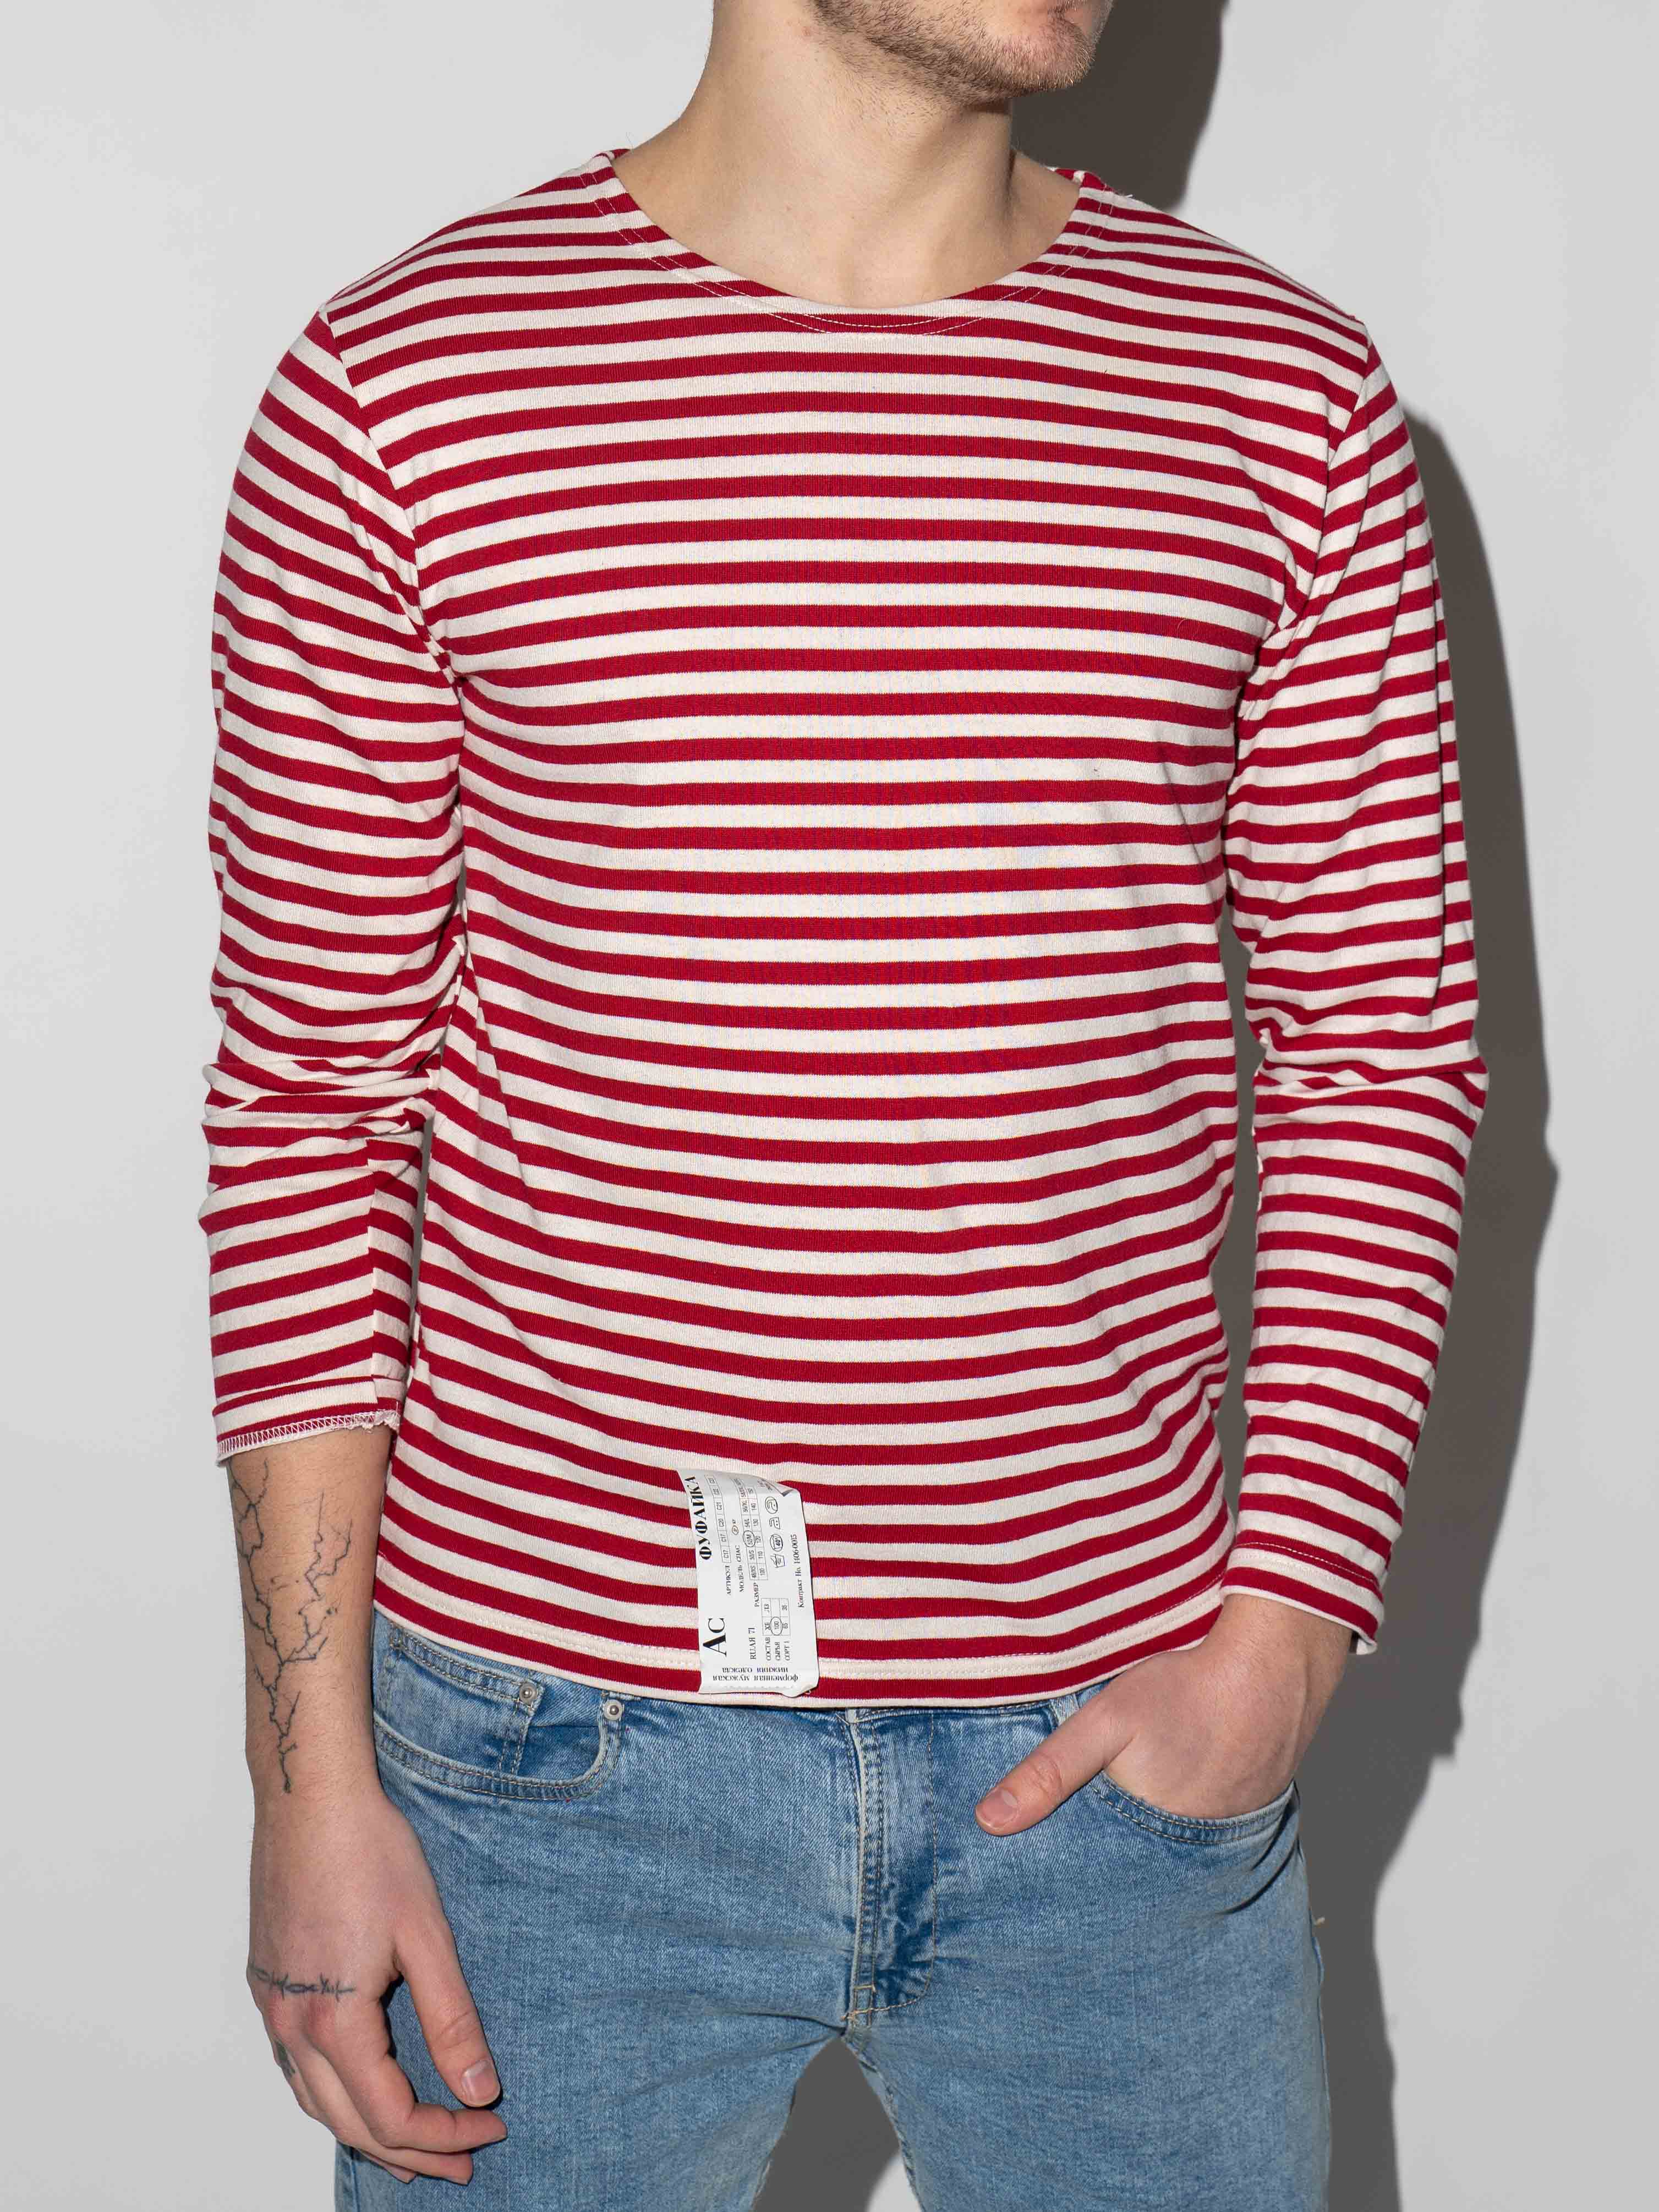 VINTAGE RED STRIPED SWEATER